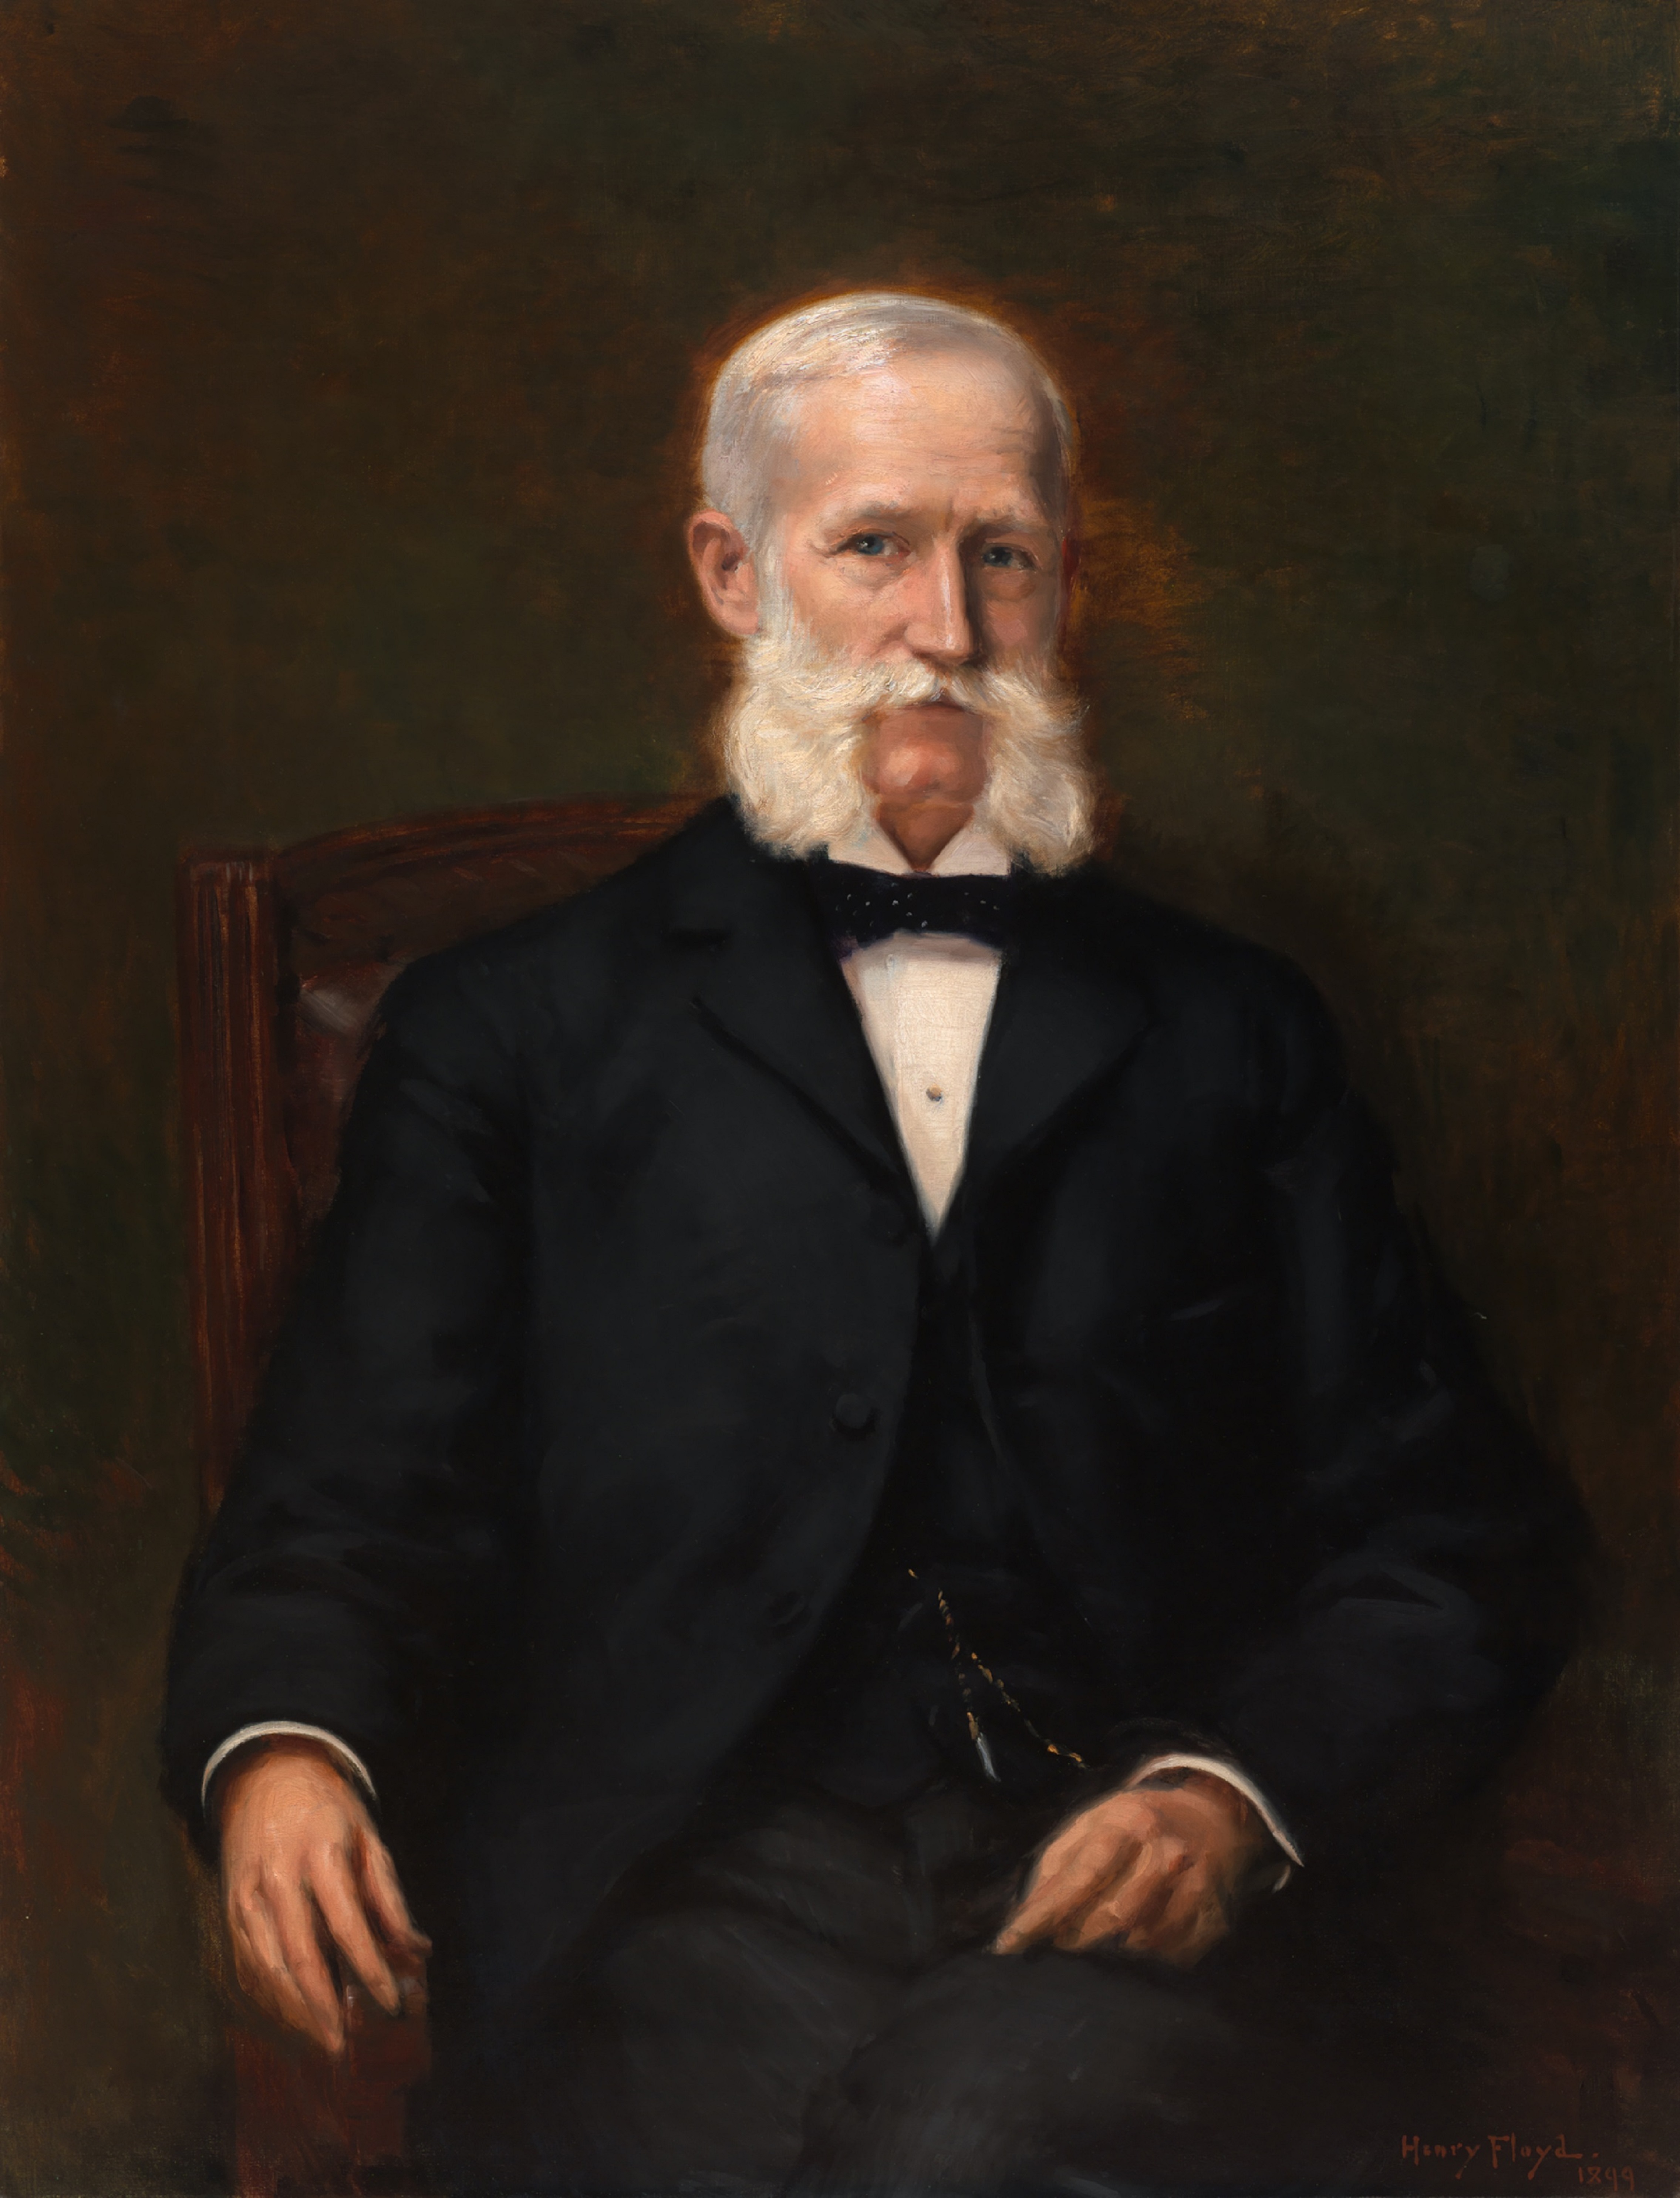 Historical portraits of past Secretaries of State